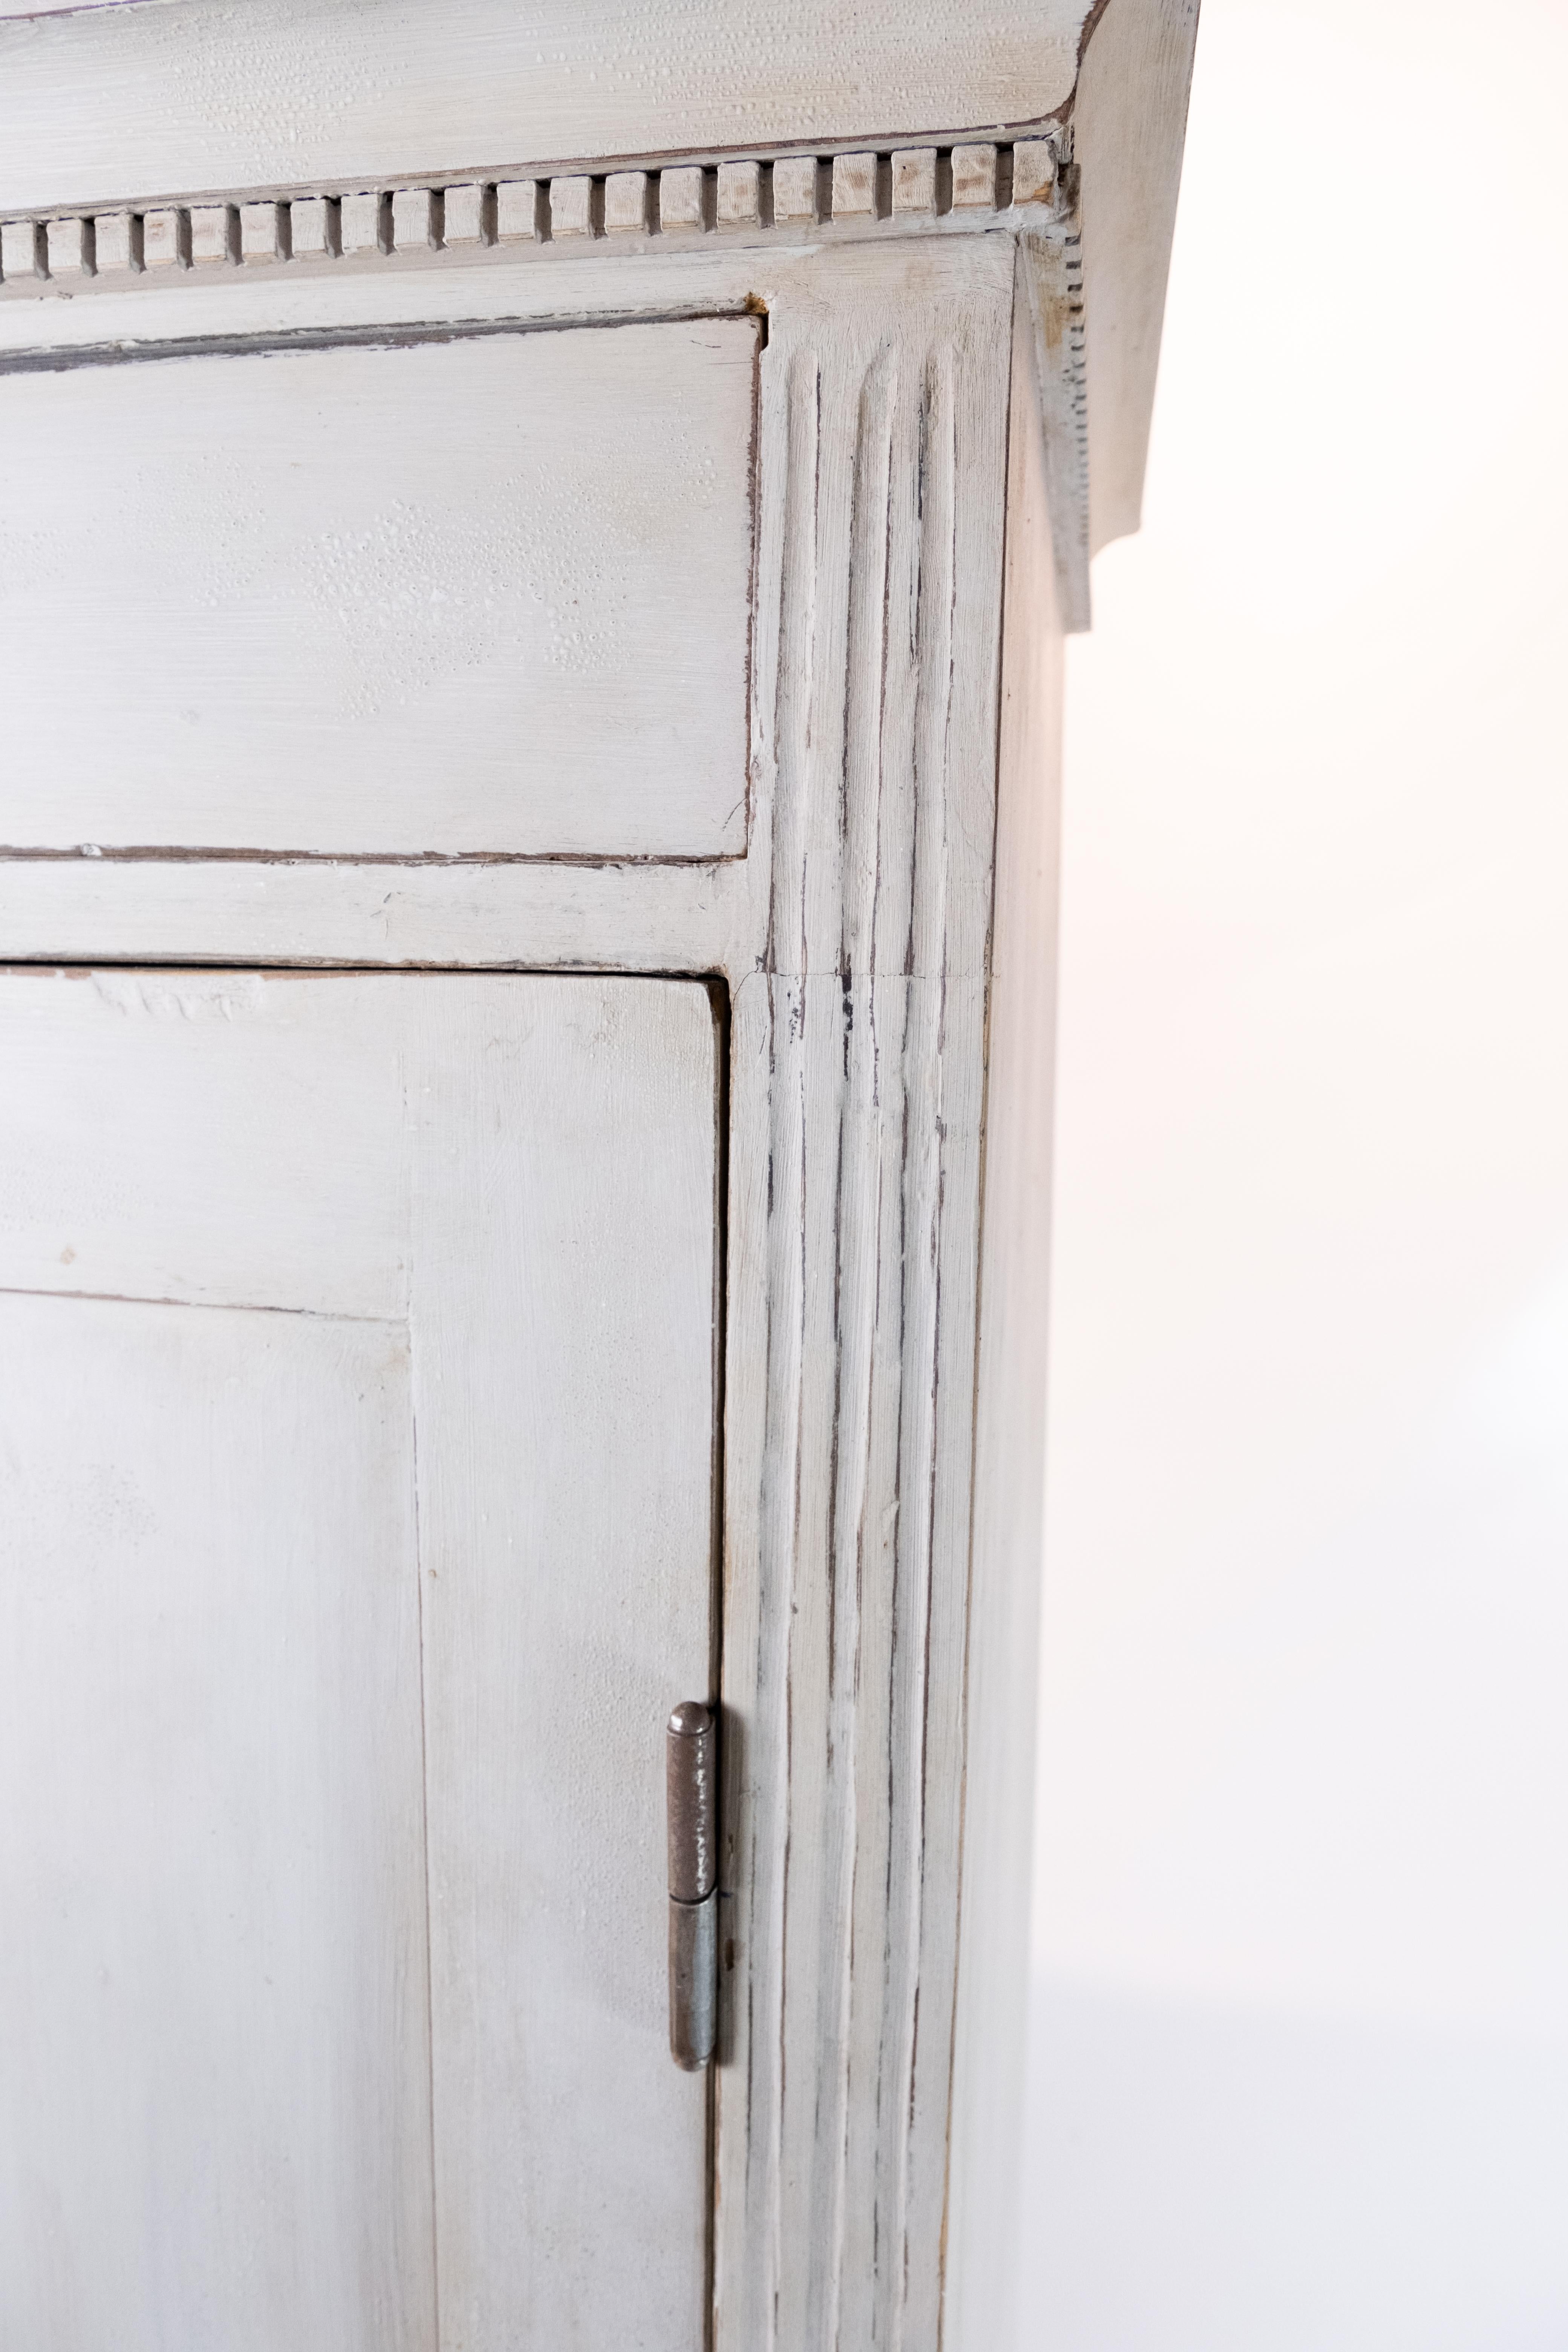 Grey Painted Gustavian Tall Cabinet, in Great Condition from the 1840s 4